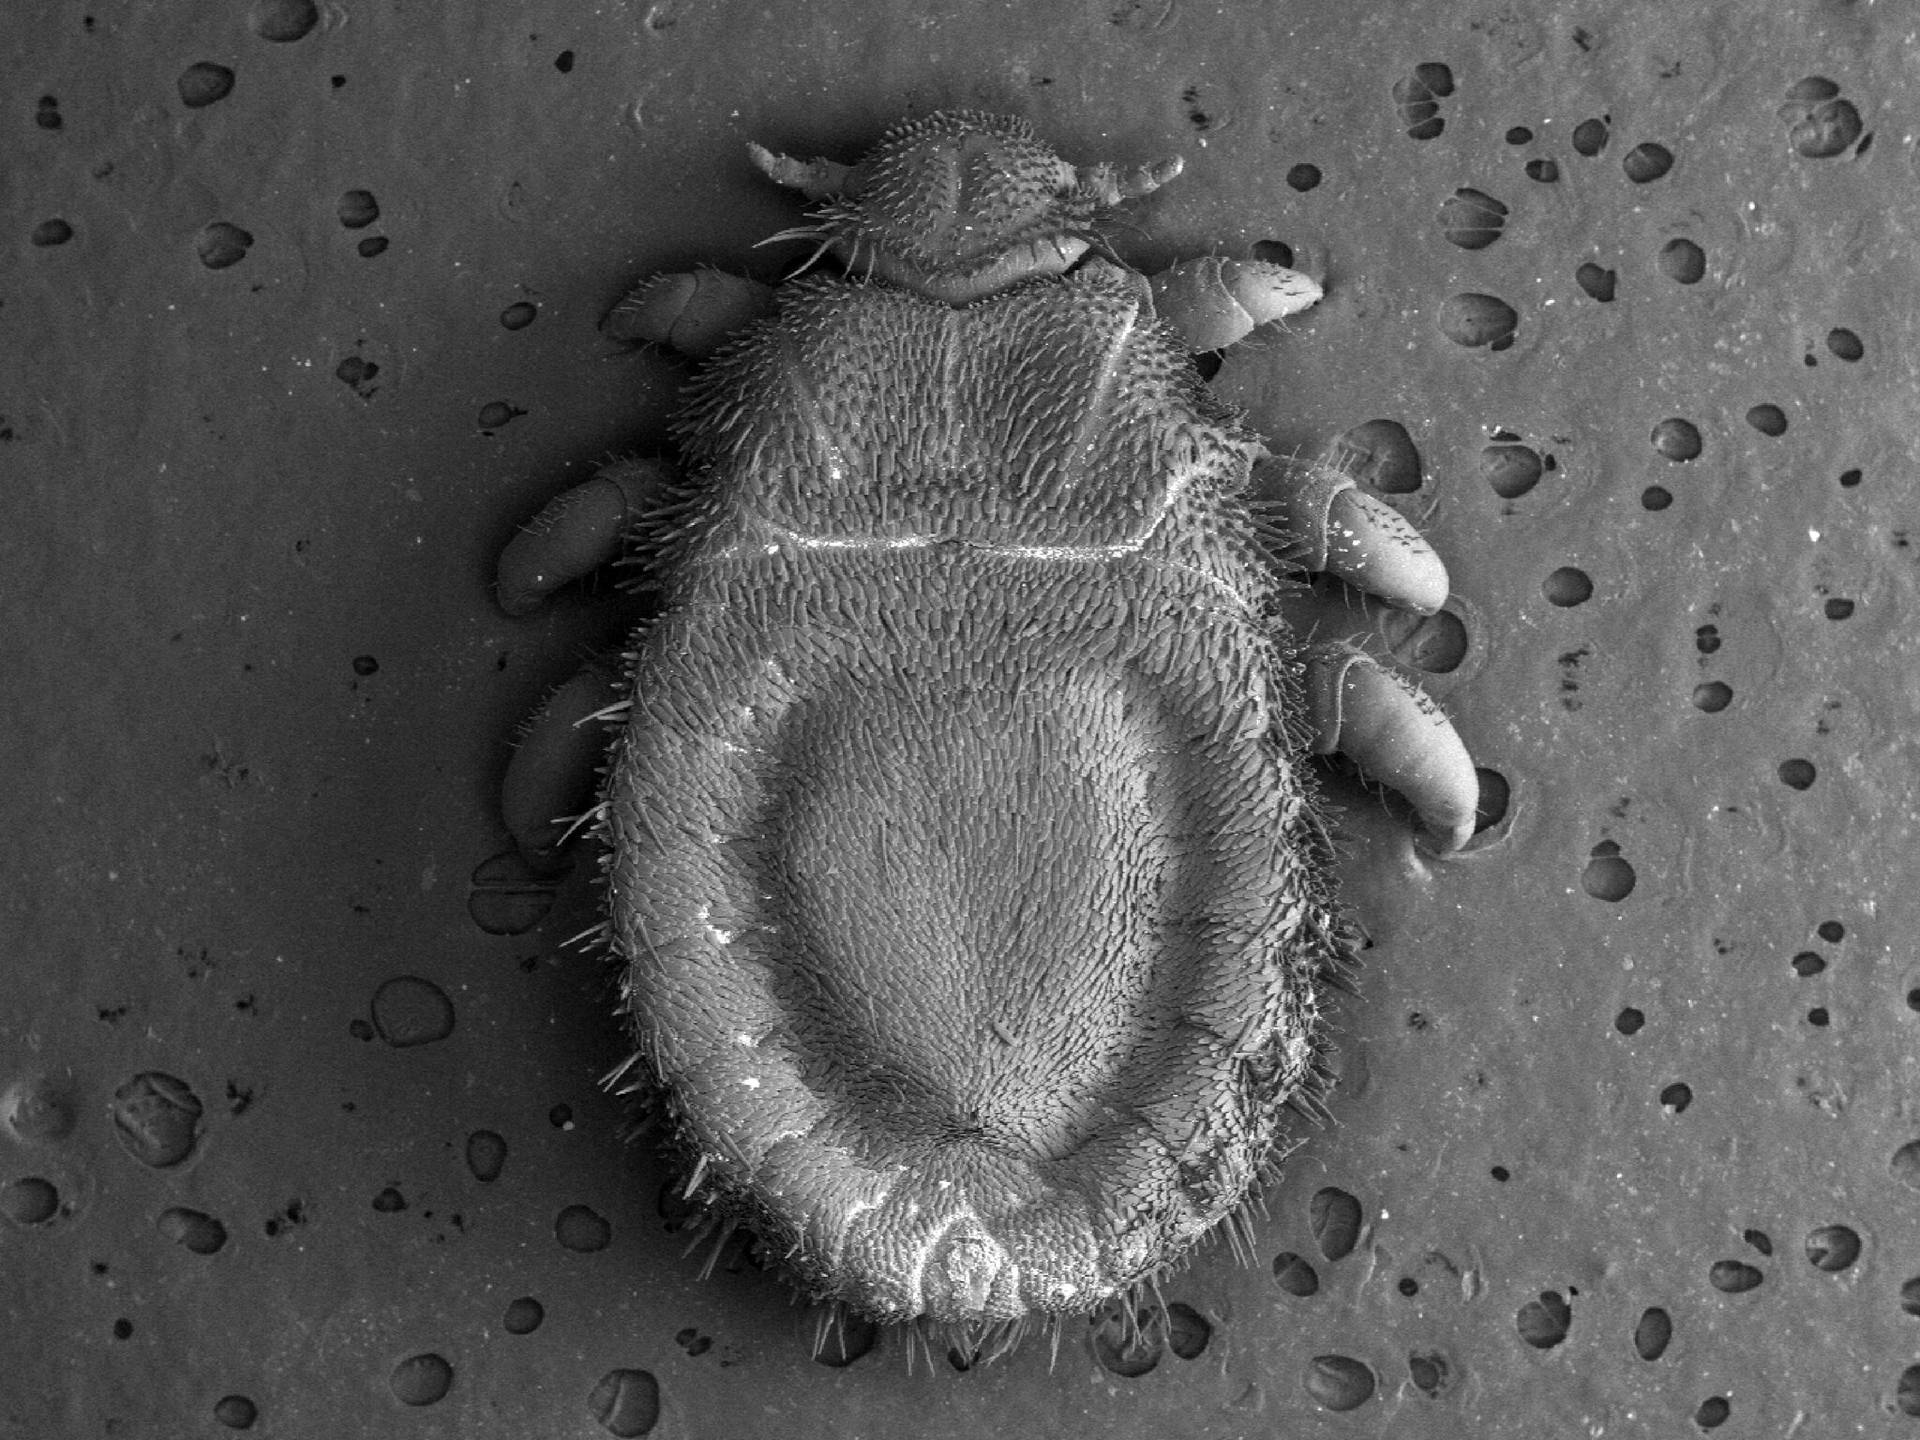 Crab Louse In Grayscale Wallpaper